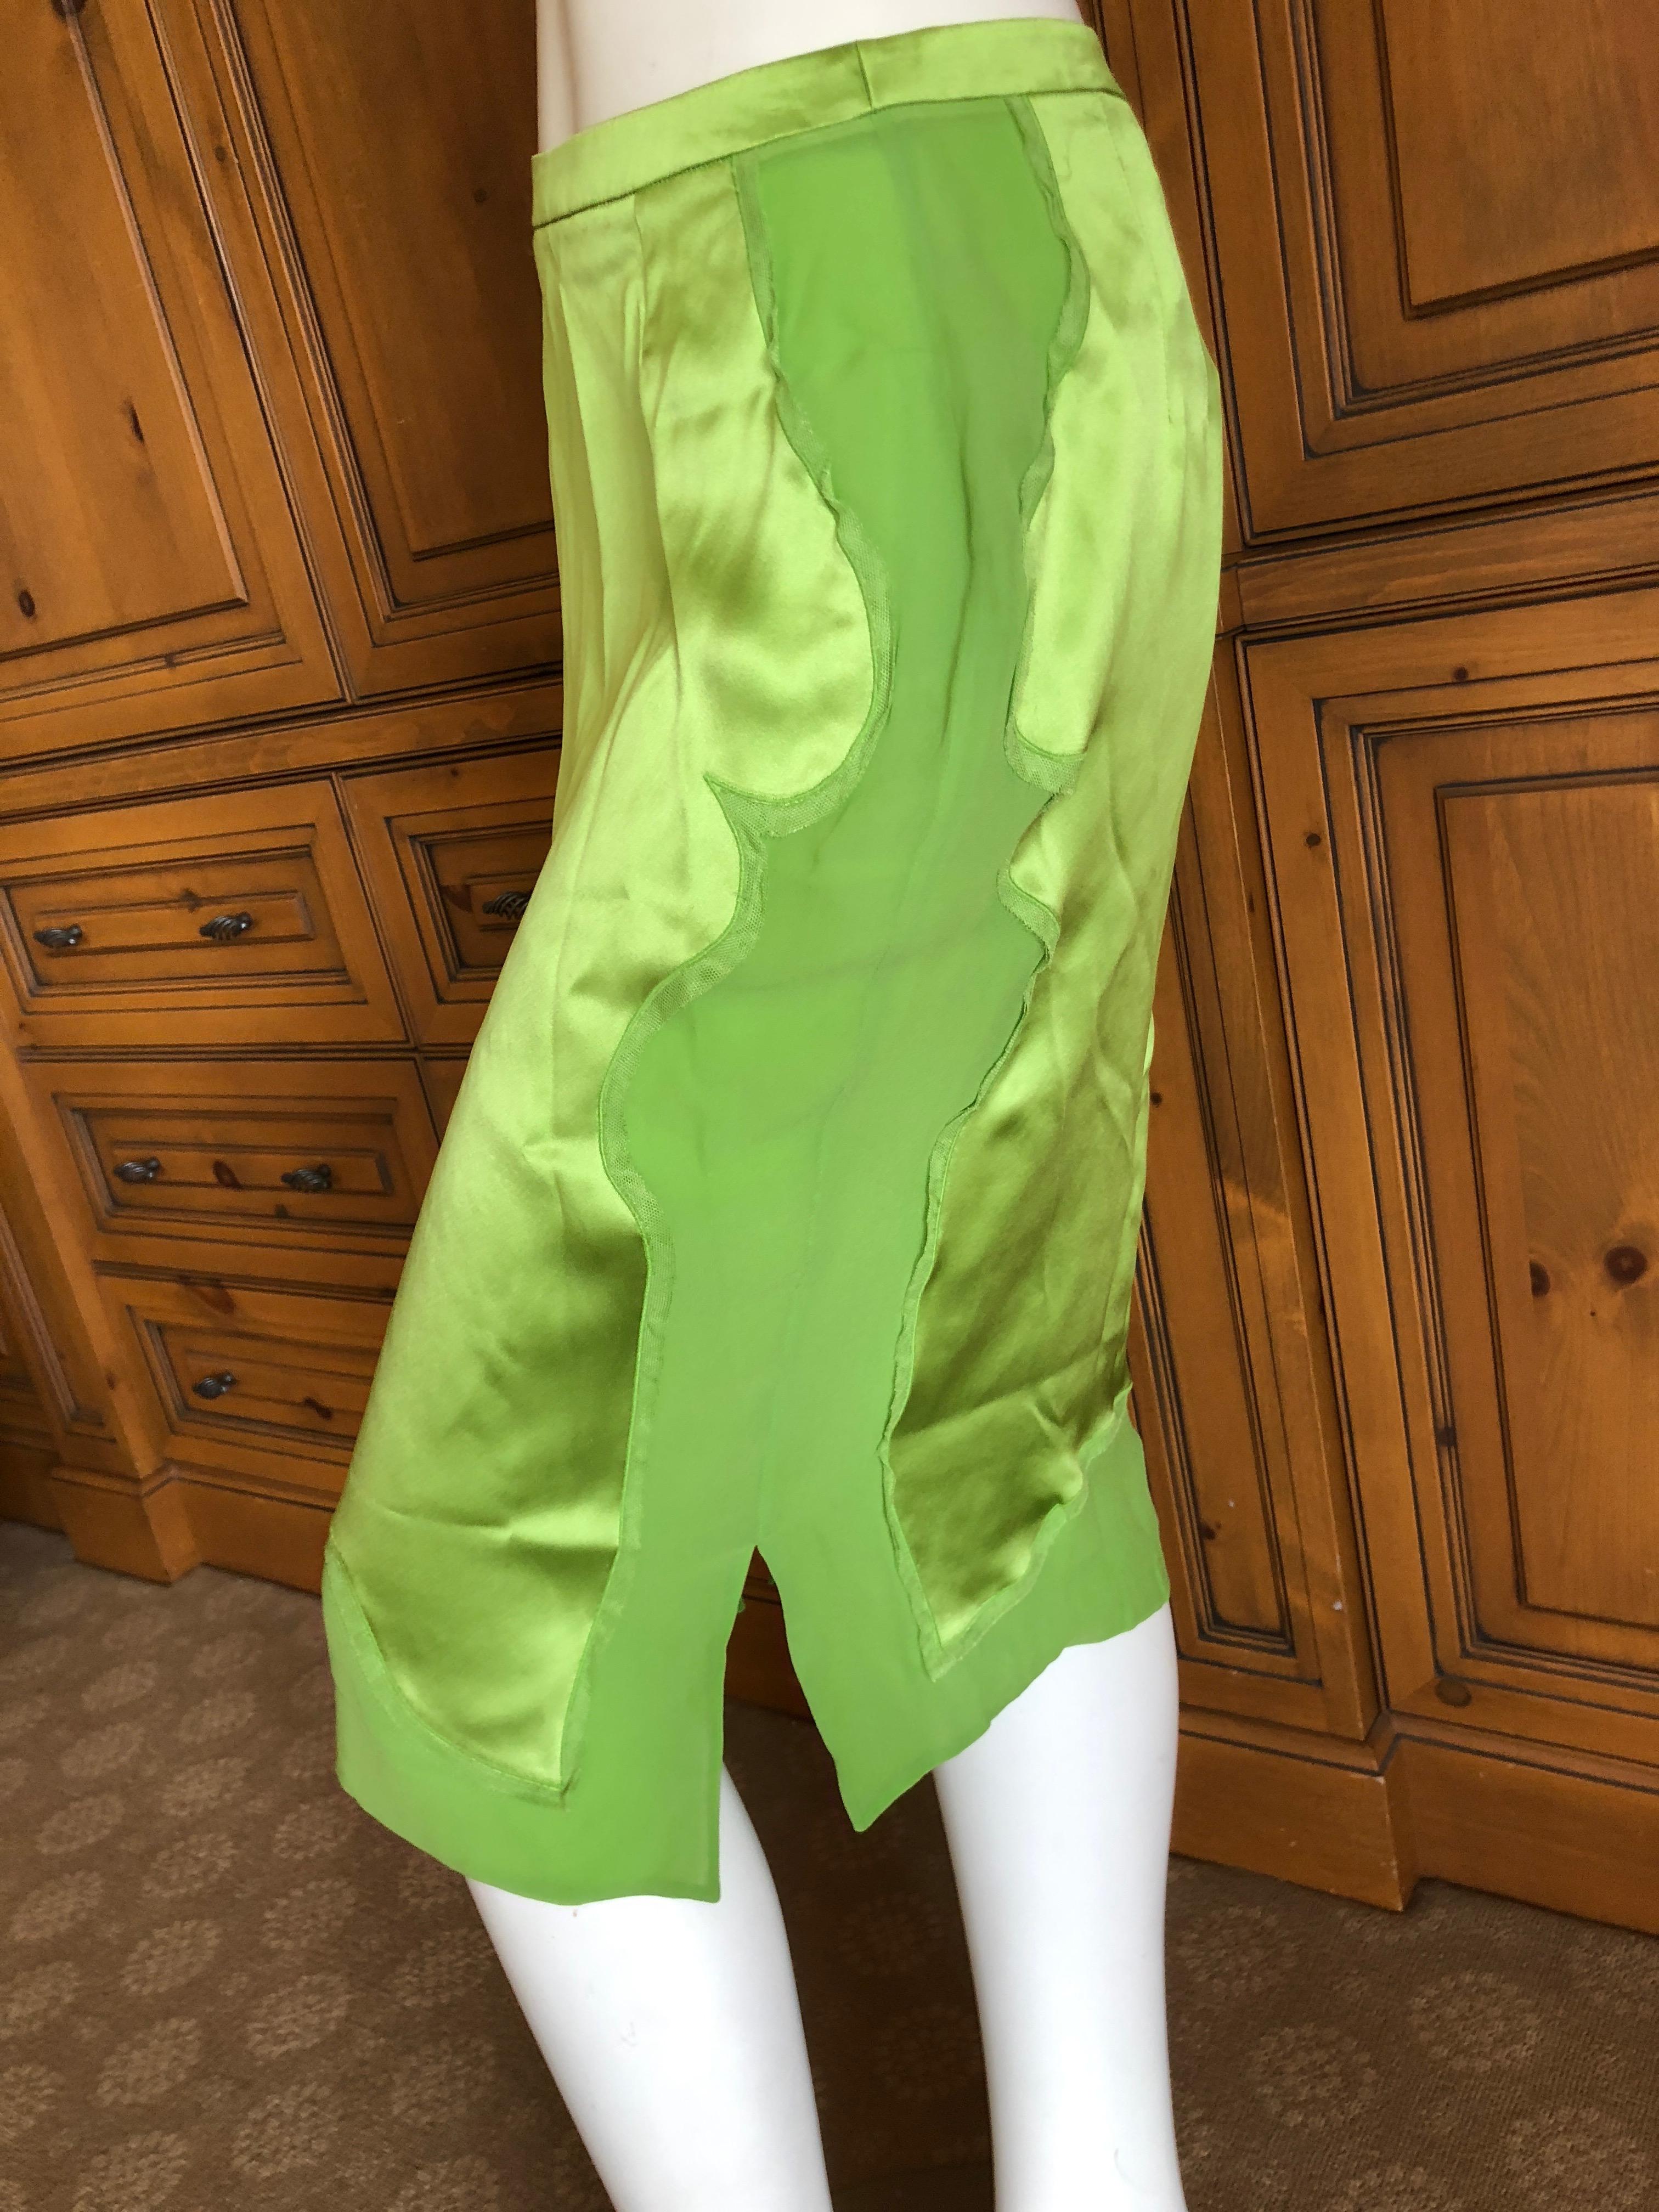 Women's Yves Saint Laurent by Tom Ford 2004 Bright Green Silk Skirt New with Tags Sz 38 For Sale